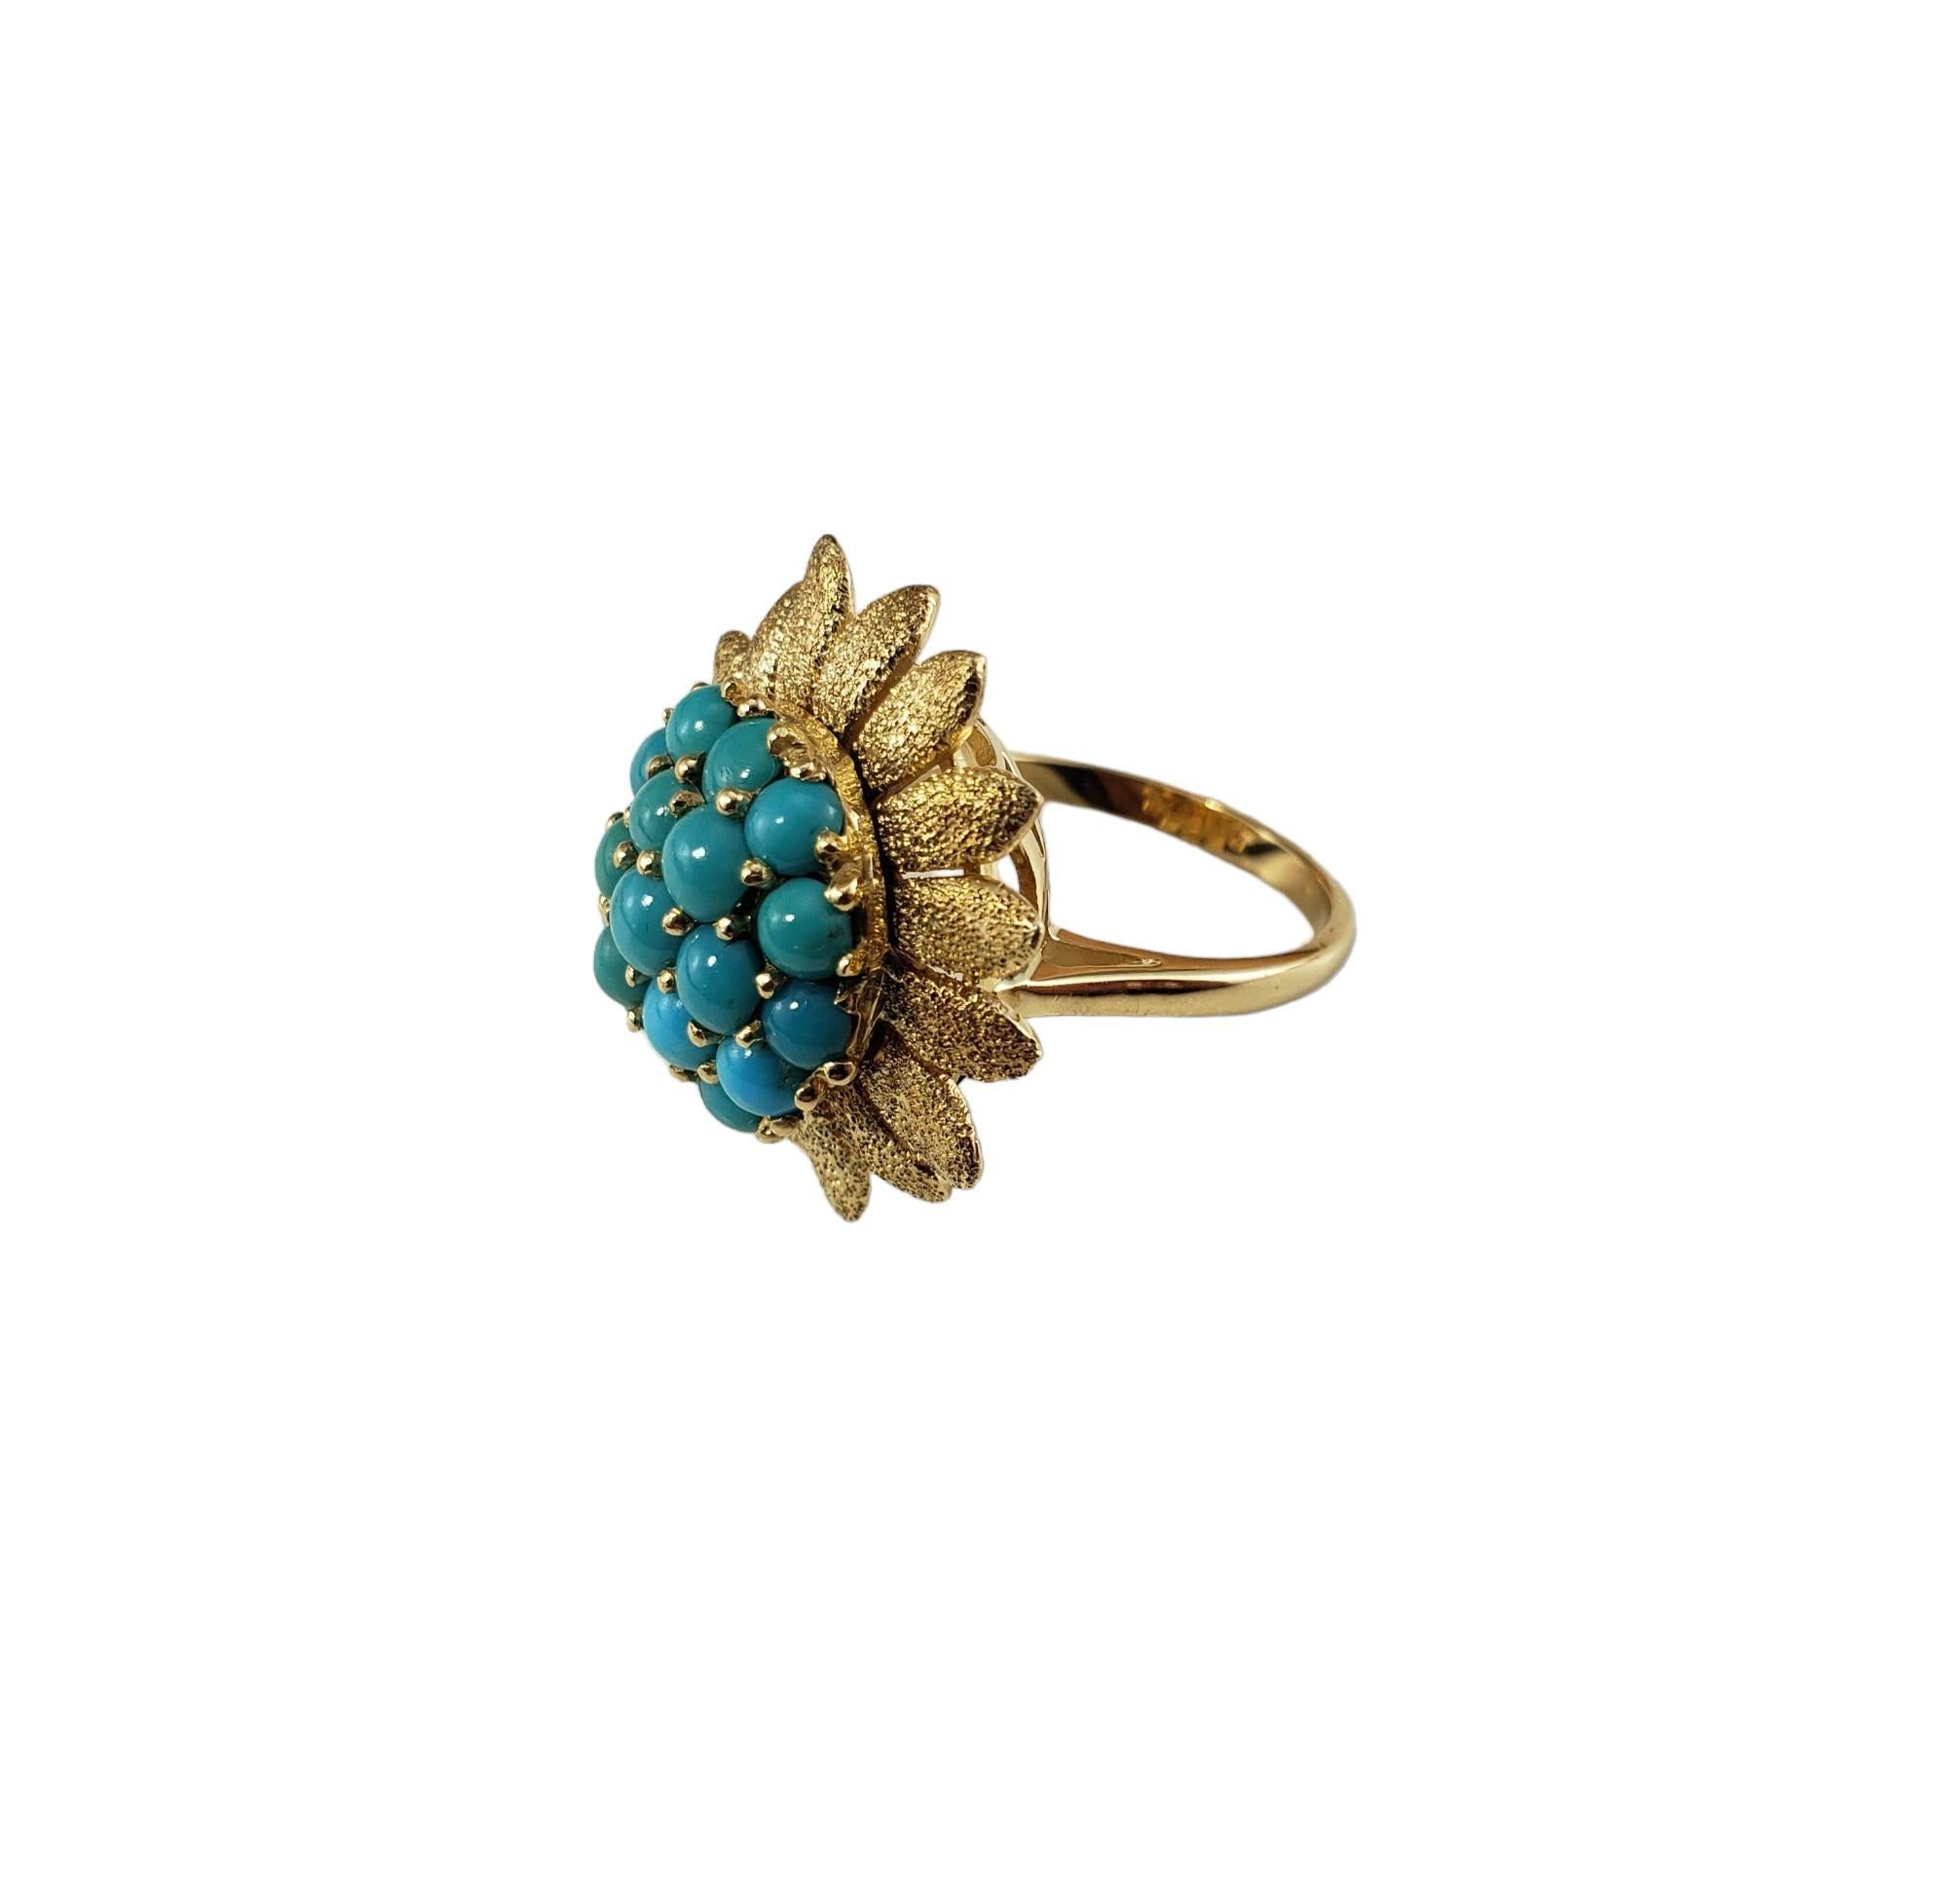 Bead 14 Karat Yellow Gold and Turquoise Sunflower Ring Size 6.25-6.5 #16077 For Sale